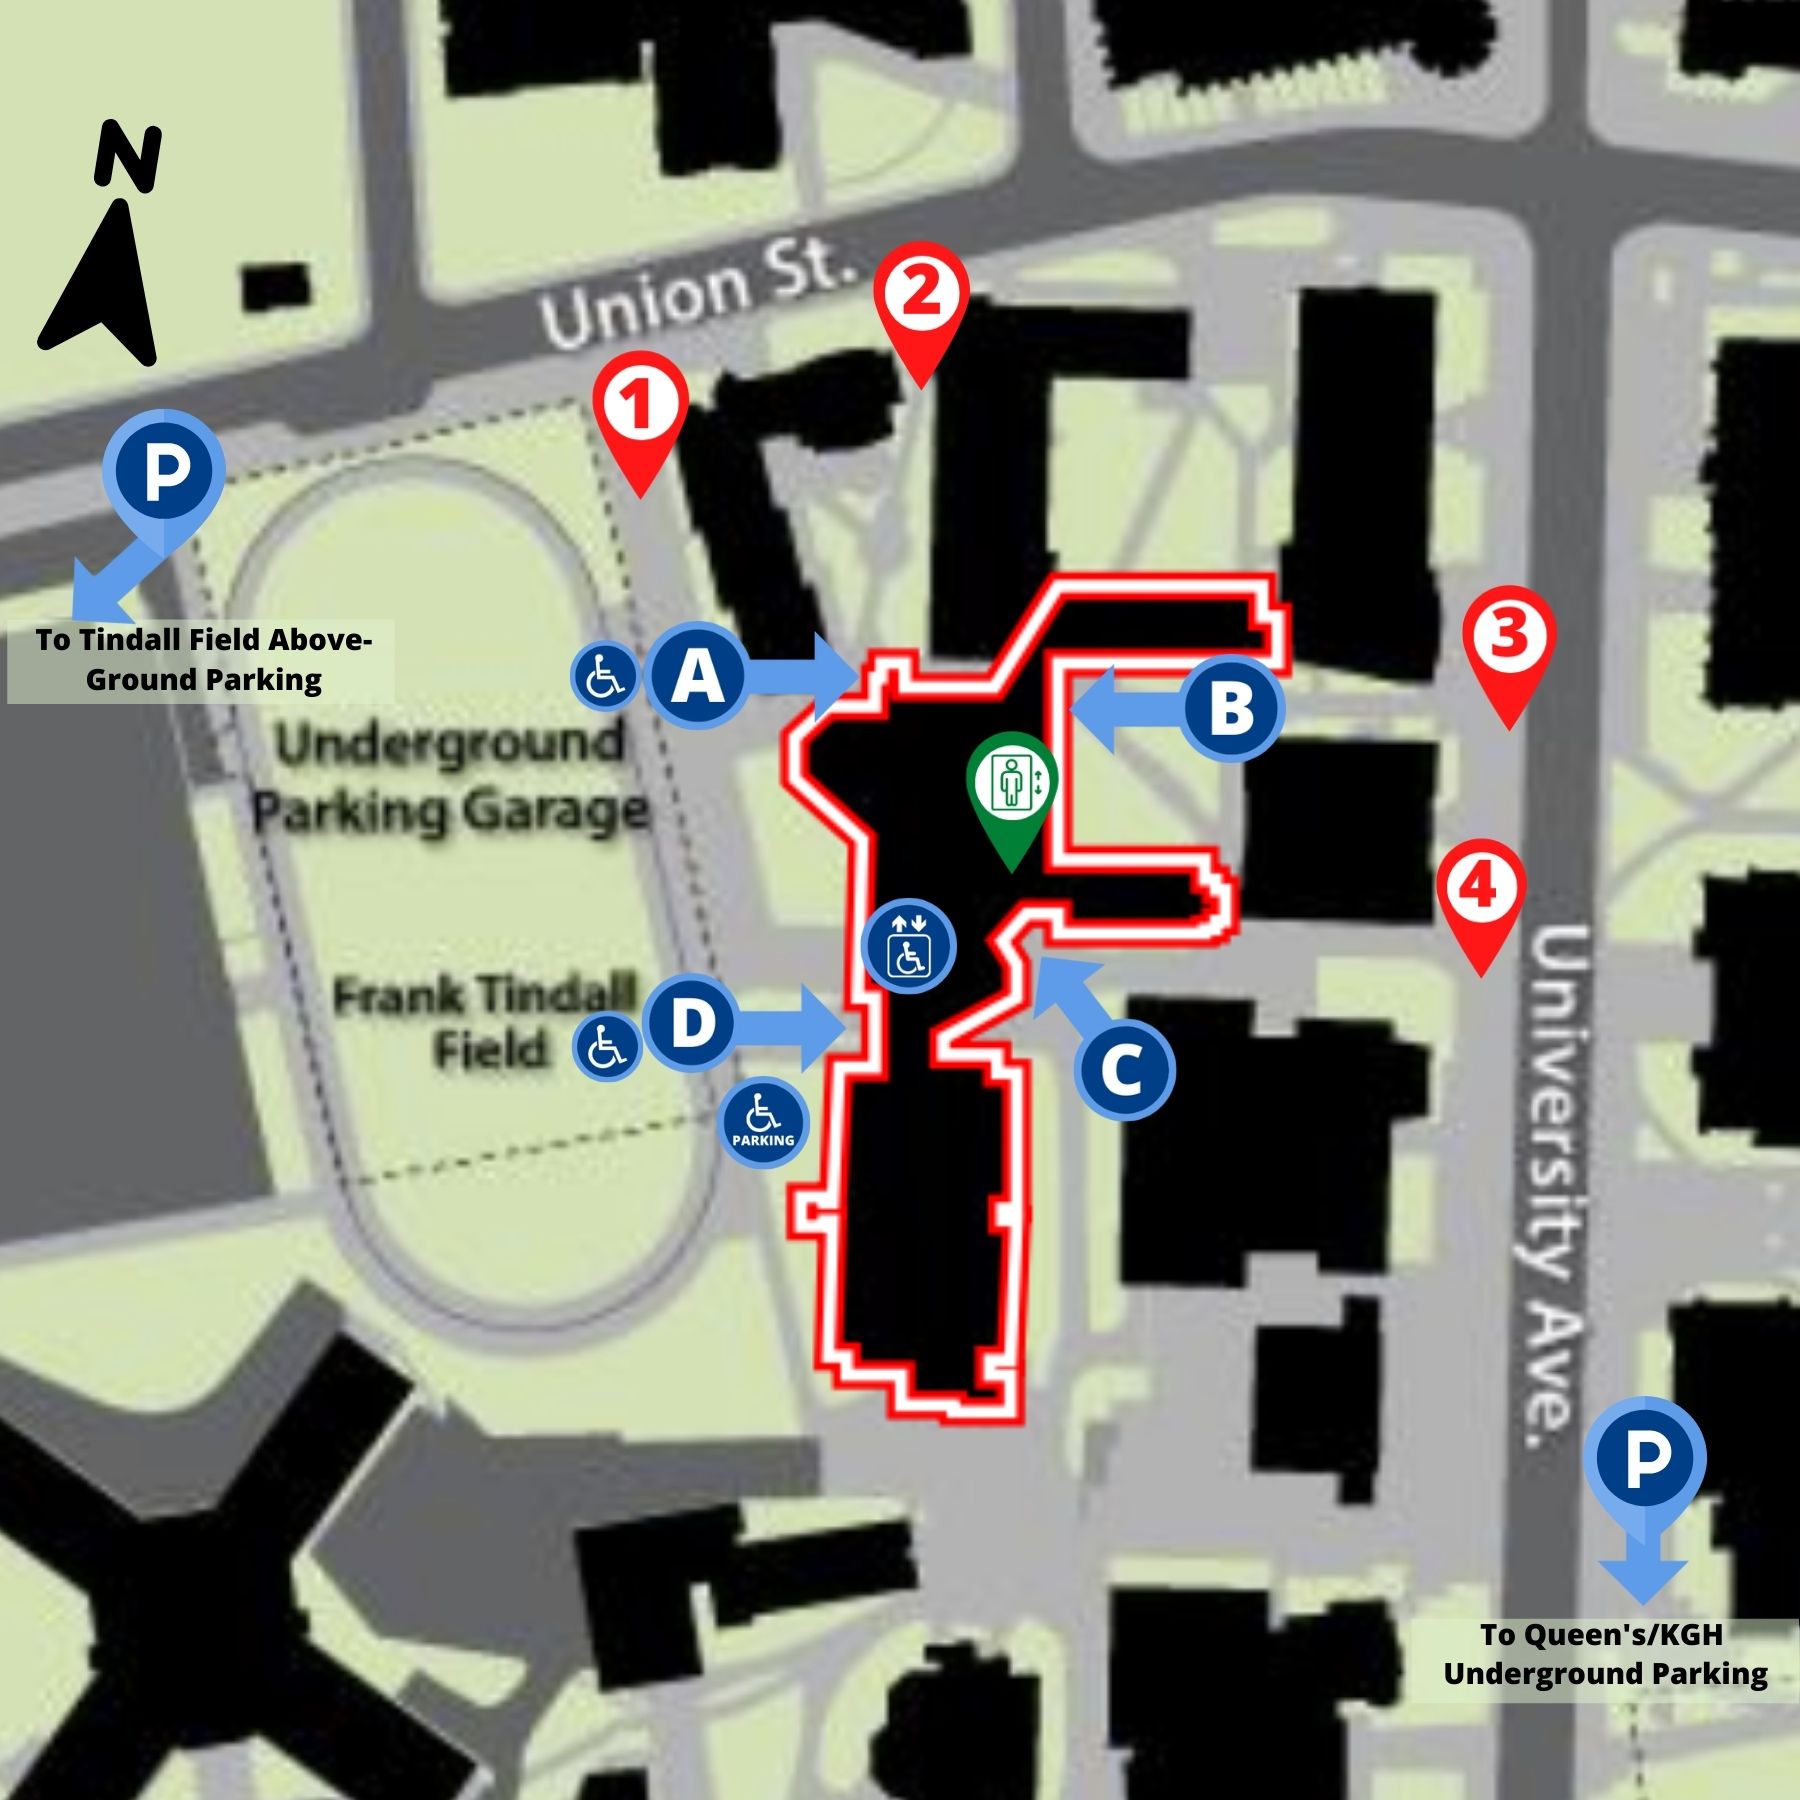 Labelled map of Mackintosh Corry Hall, icons are described in text in next to the image